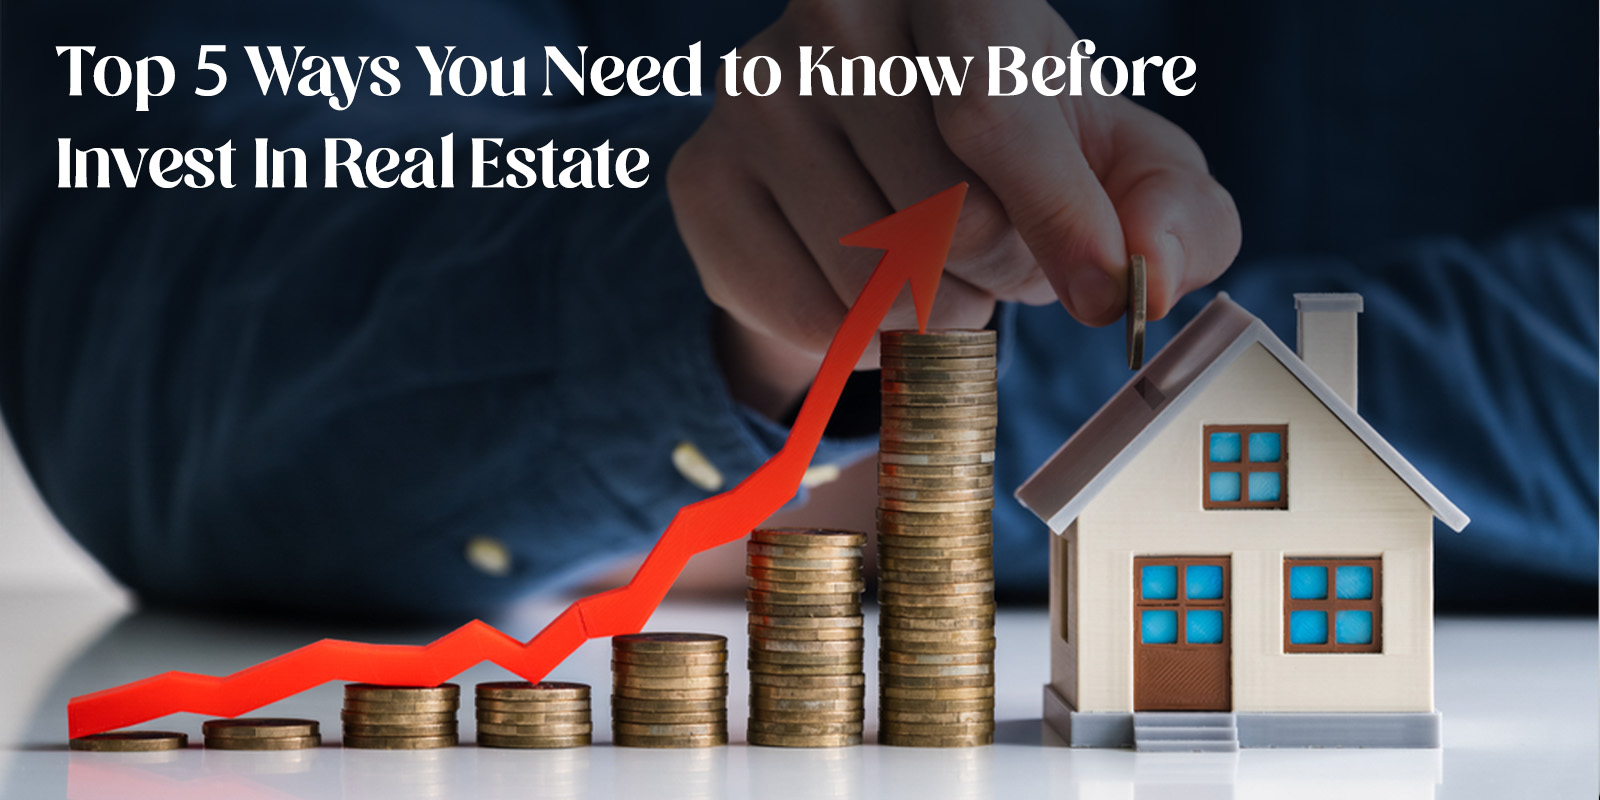 Top 5 Ways You Need to Know Before Invest in Real Estate